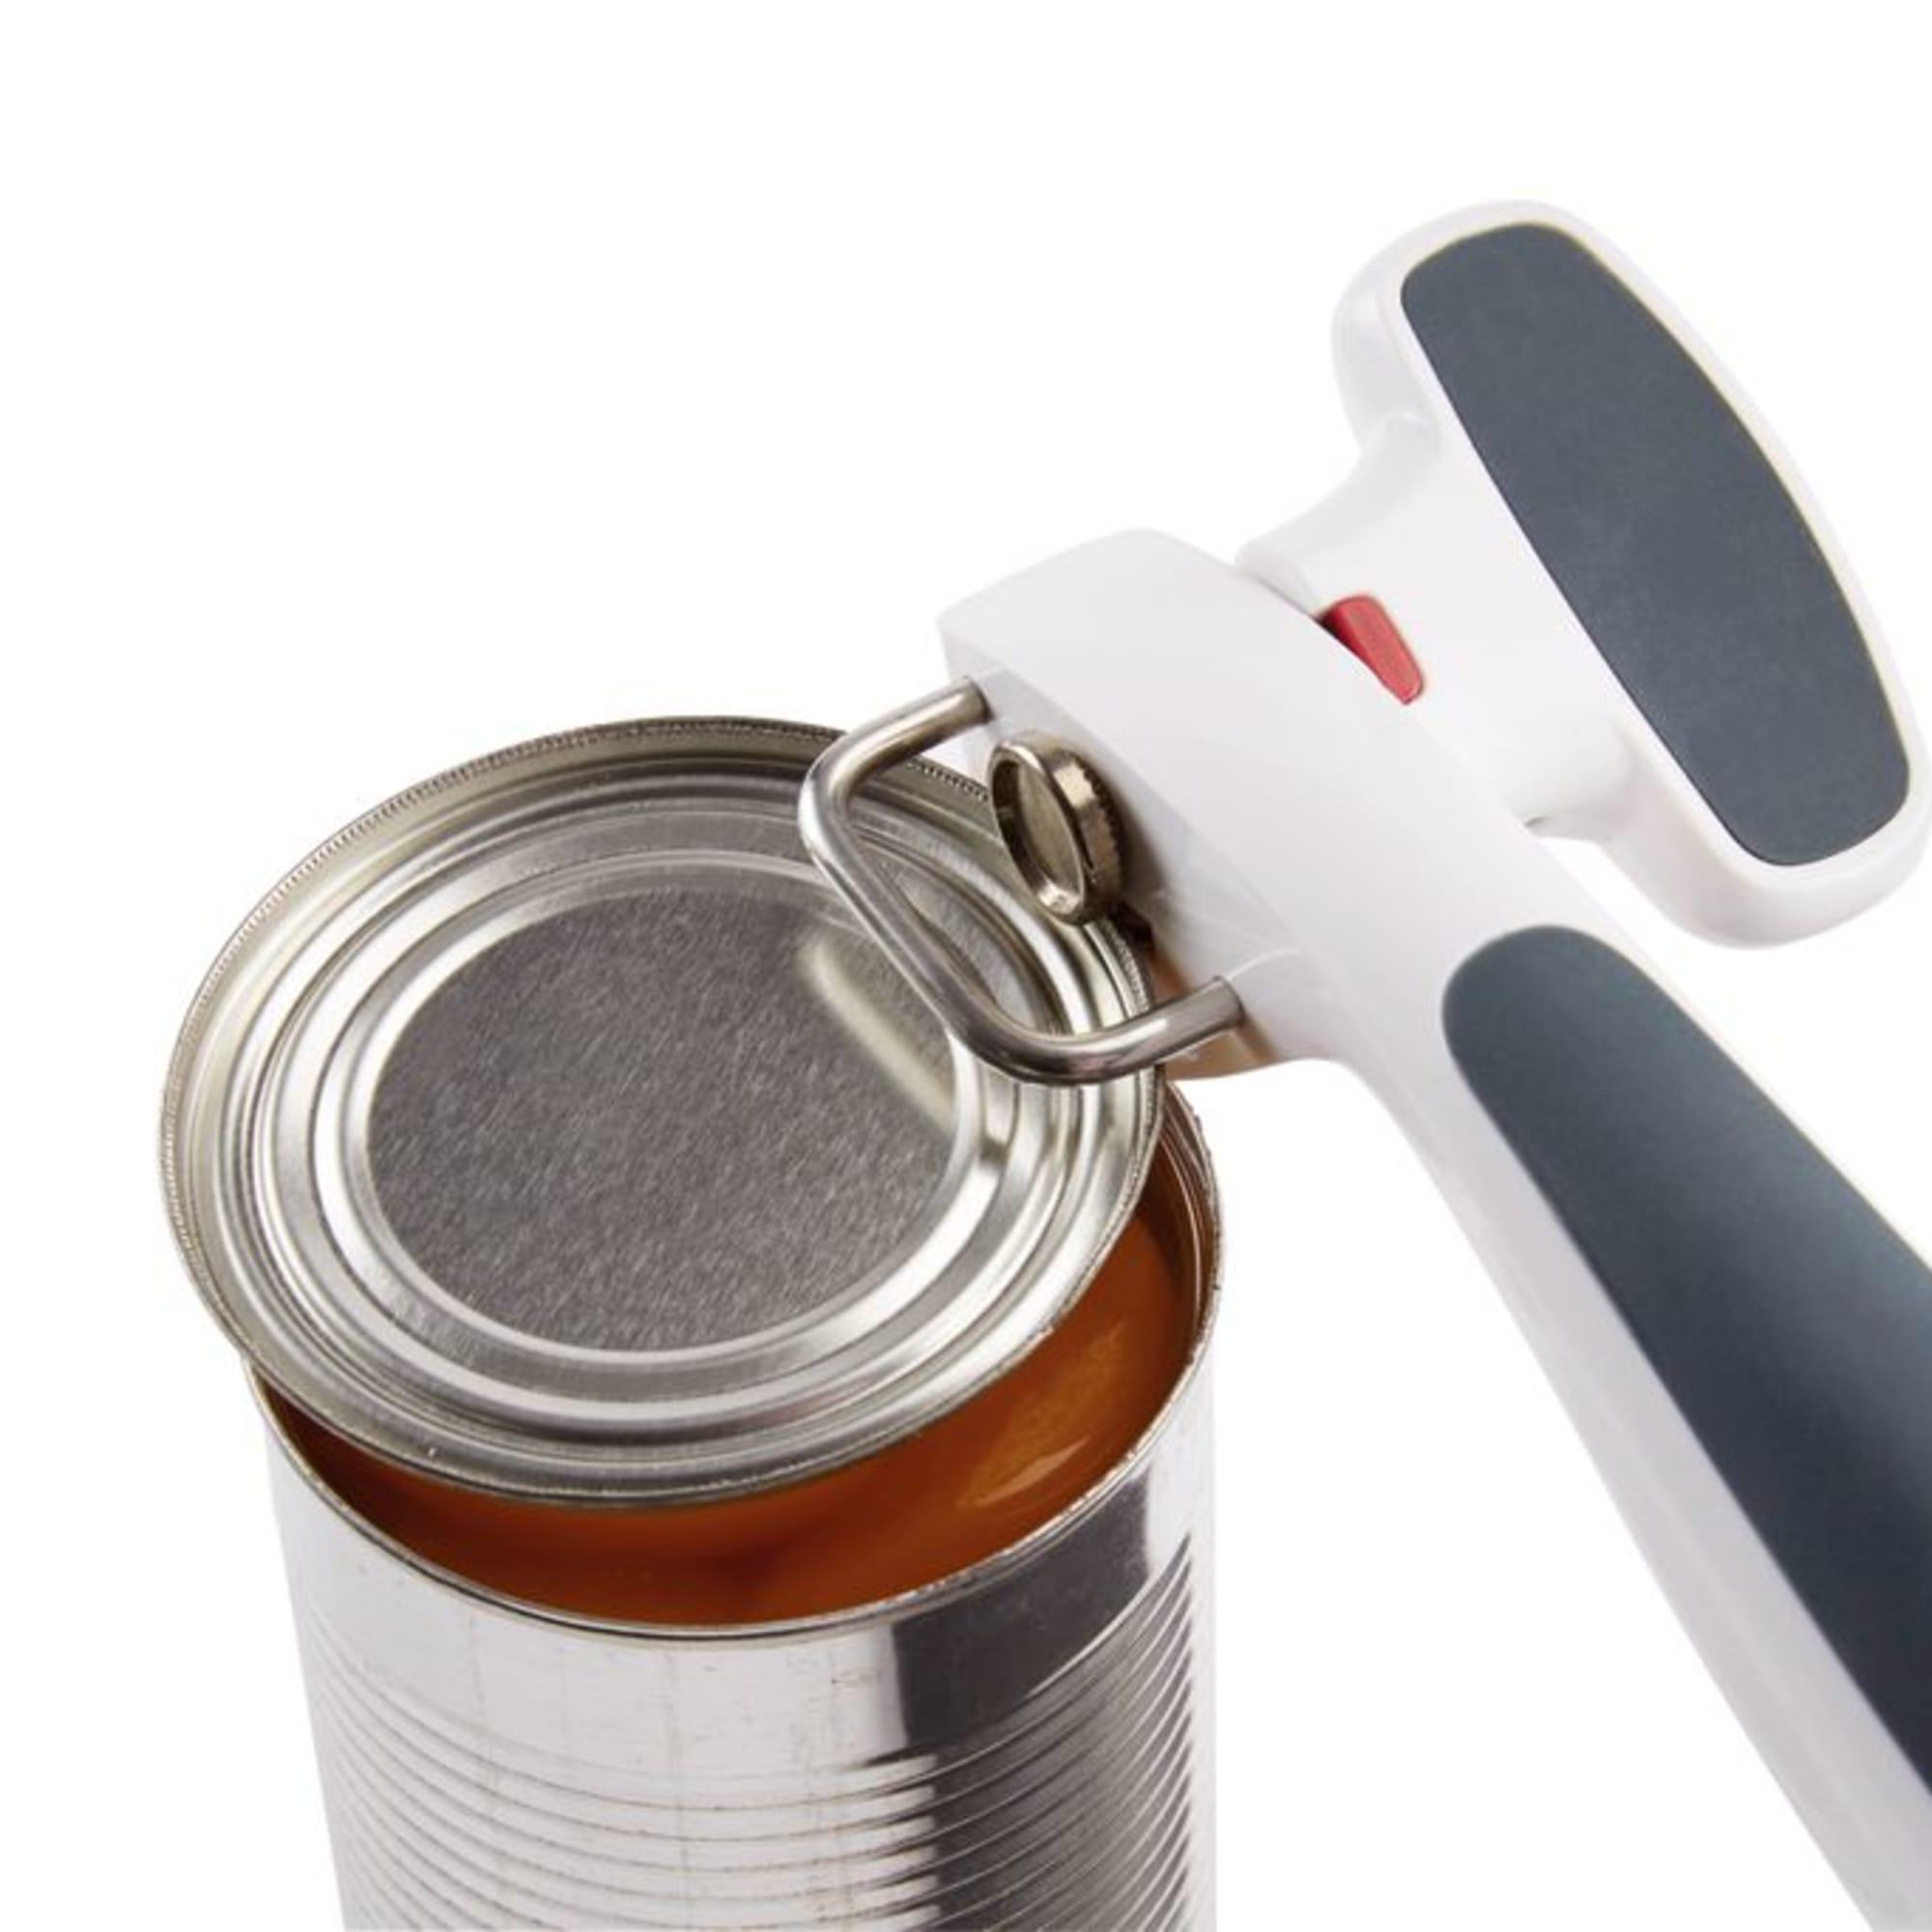 Zyliss Safe Edge Can Opener Image 5